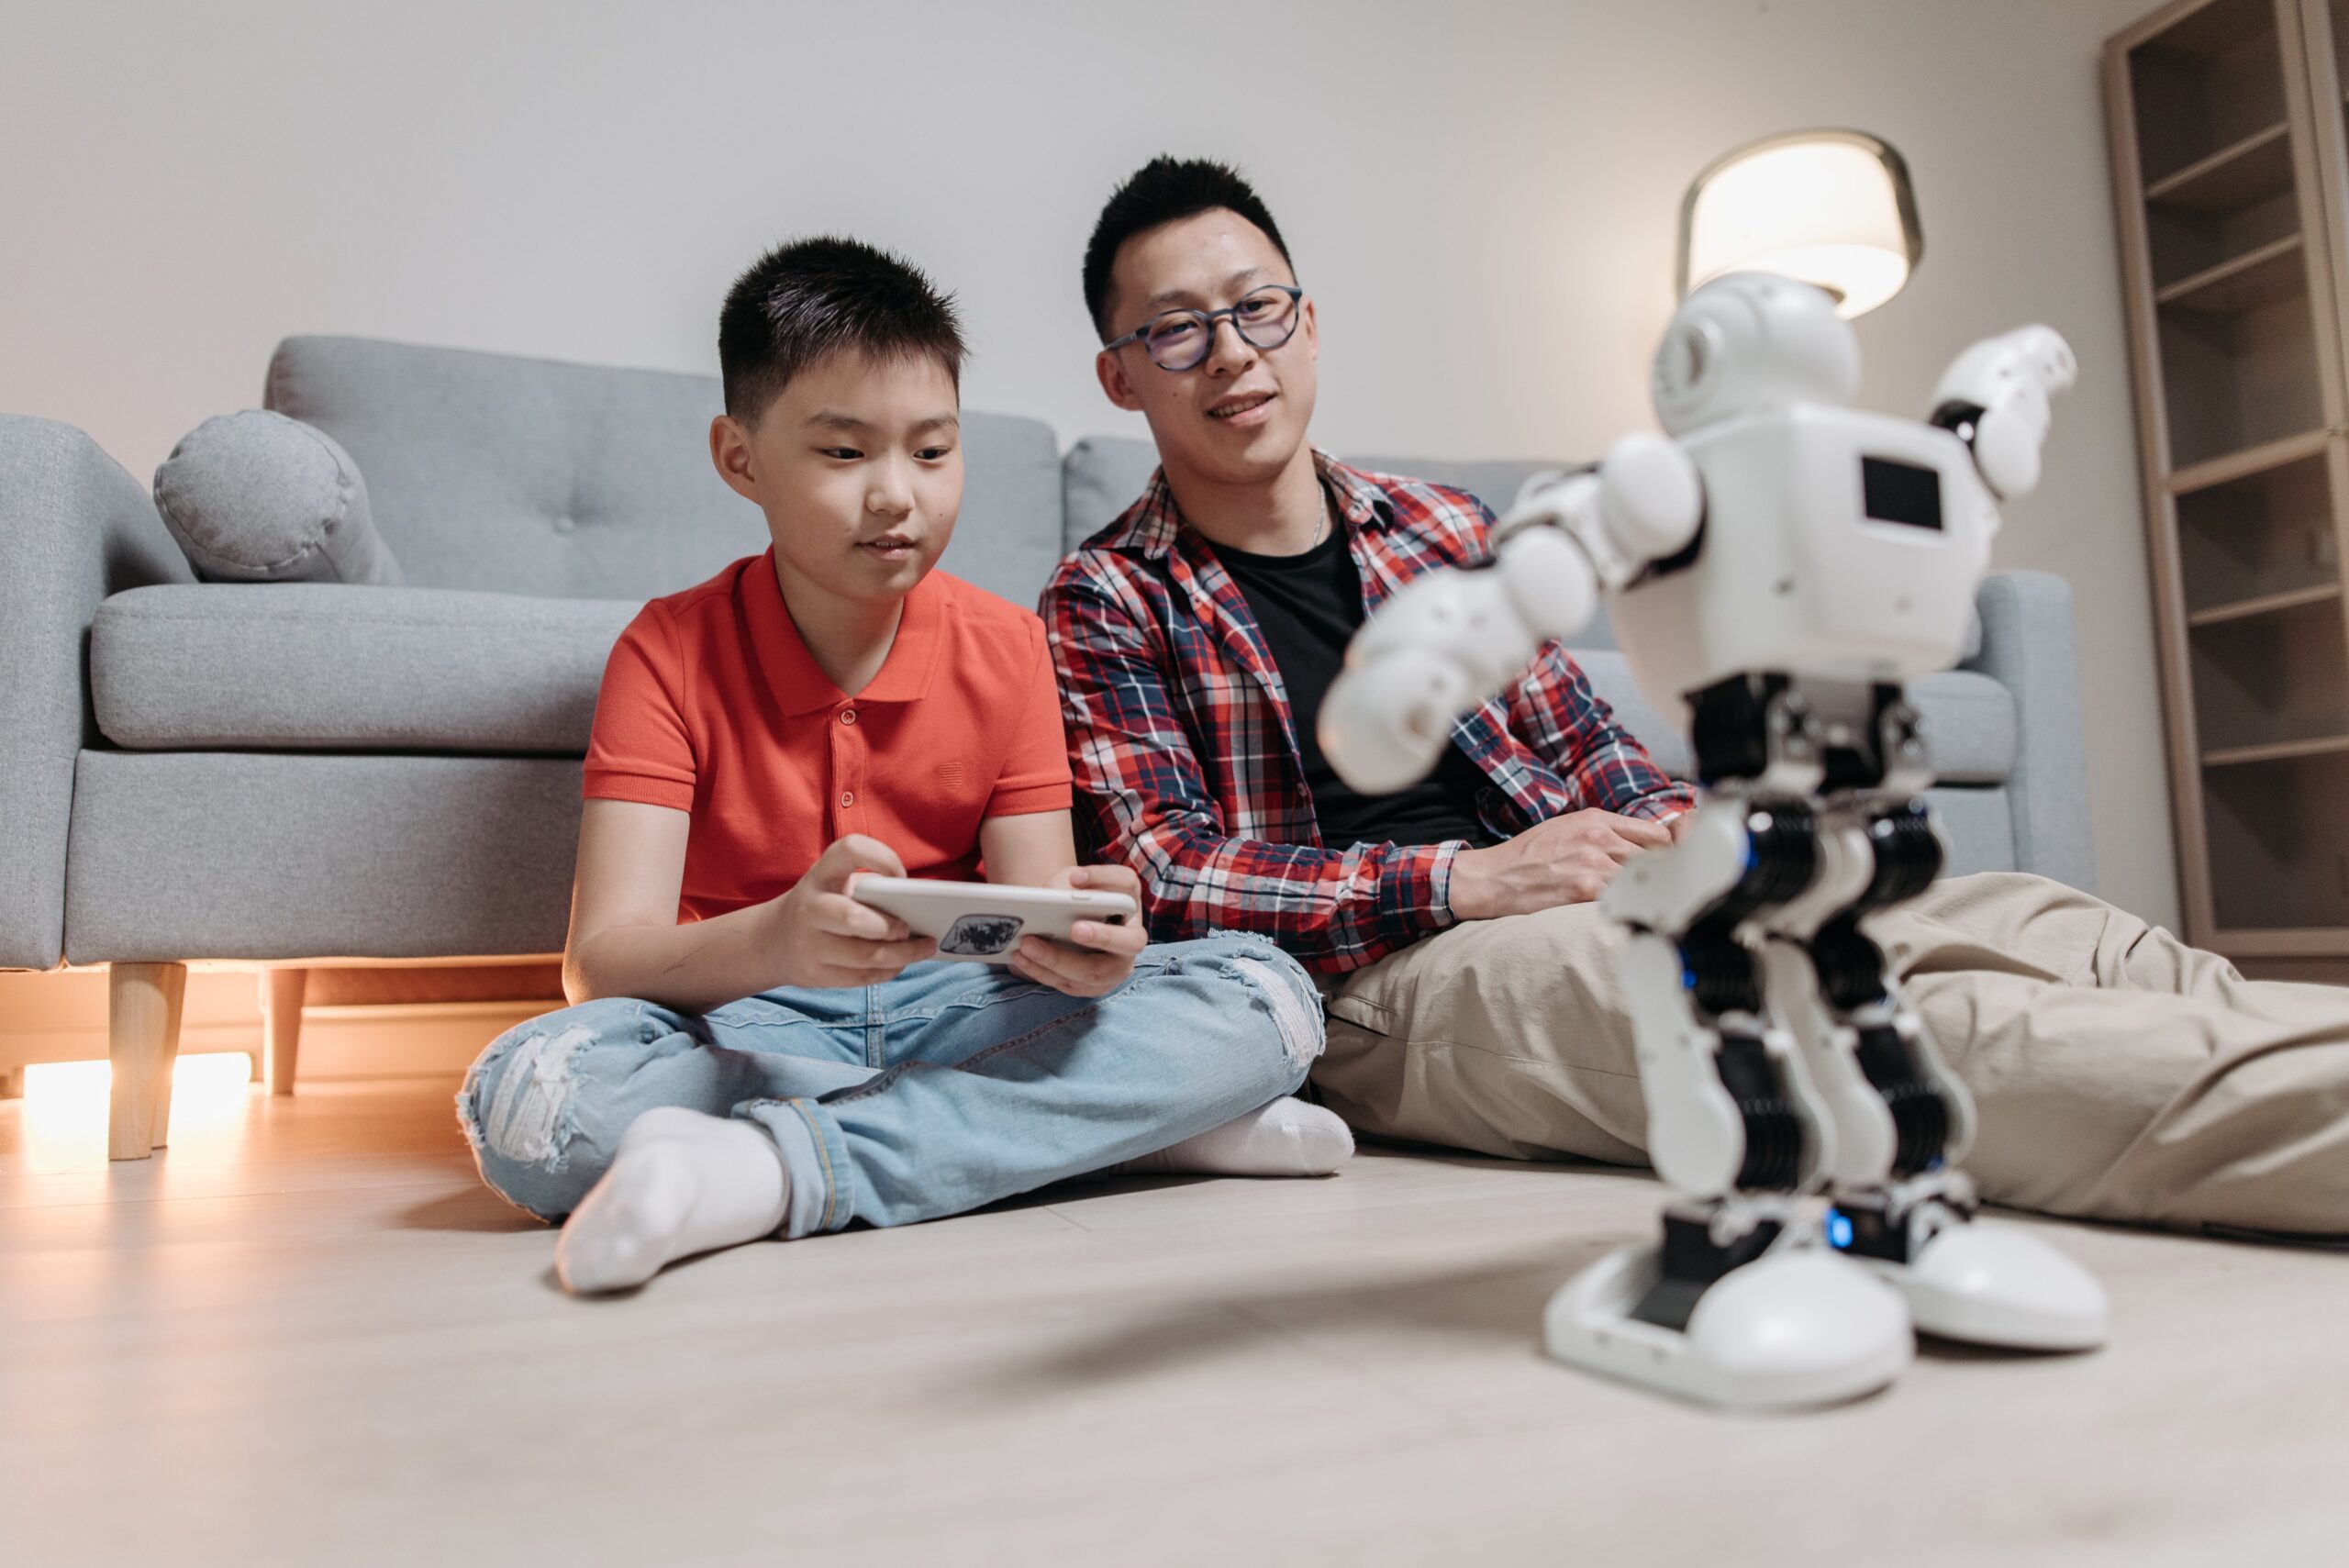 a man sitting next to a boy holding a remote controller playing with a robot toy